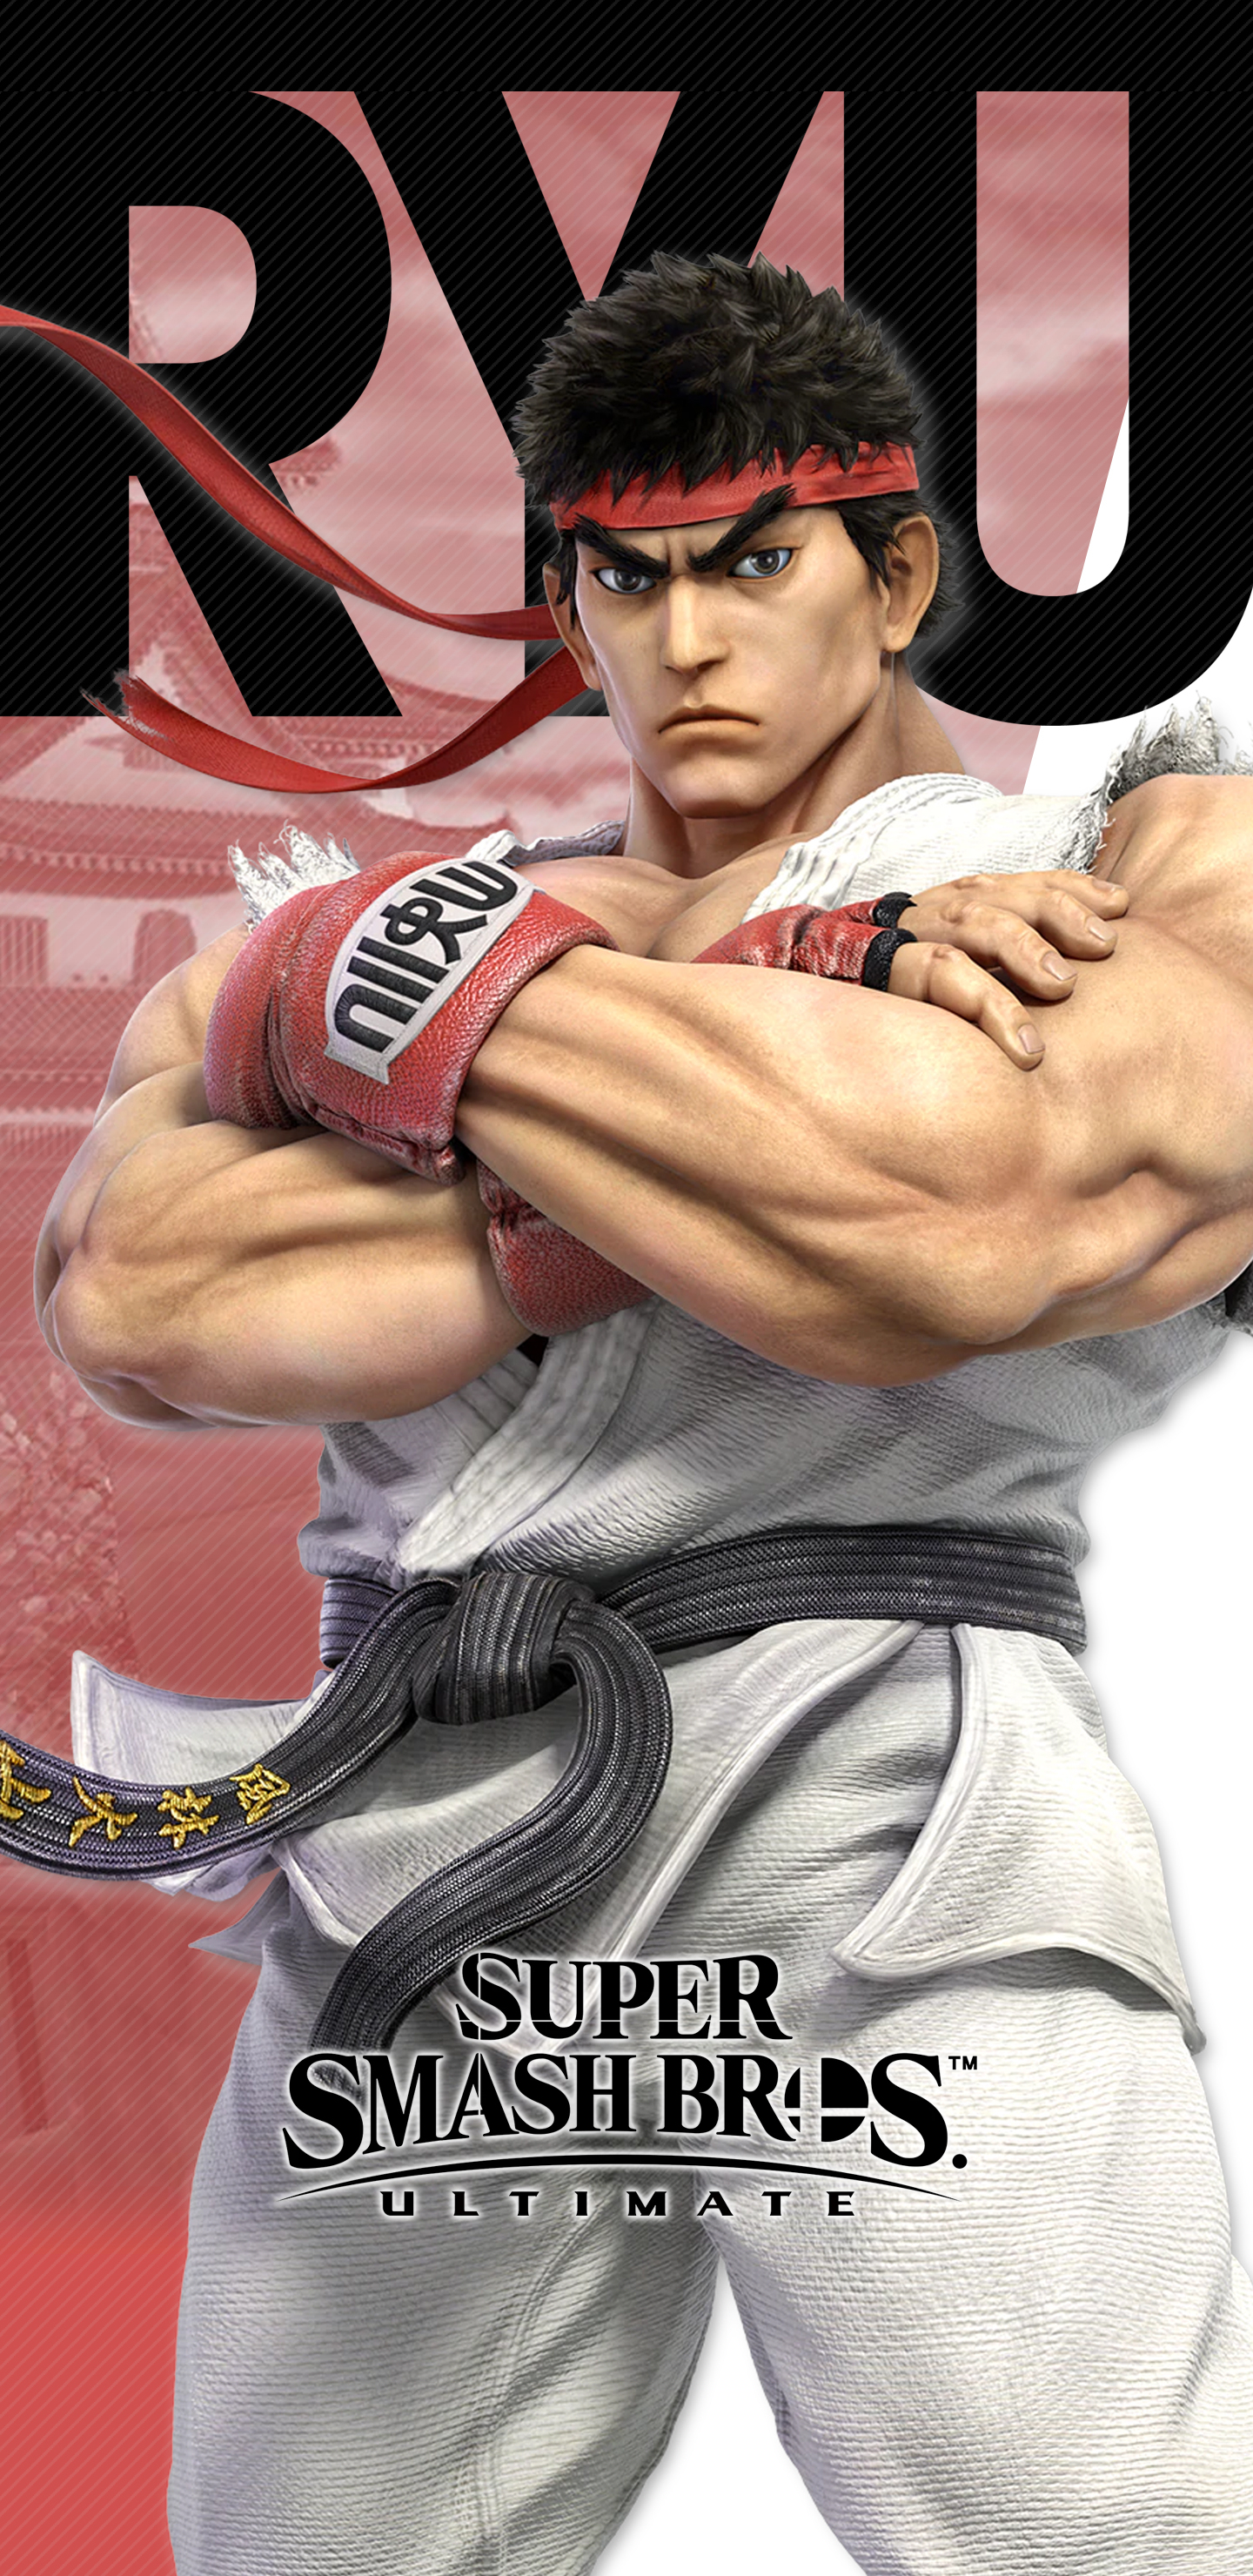 1440x2960 Super Smash Bros Ultimate Ryu Wallpapers Cat with Monocle